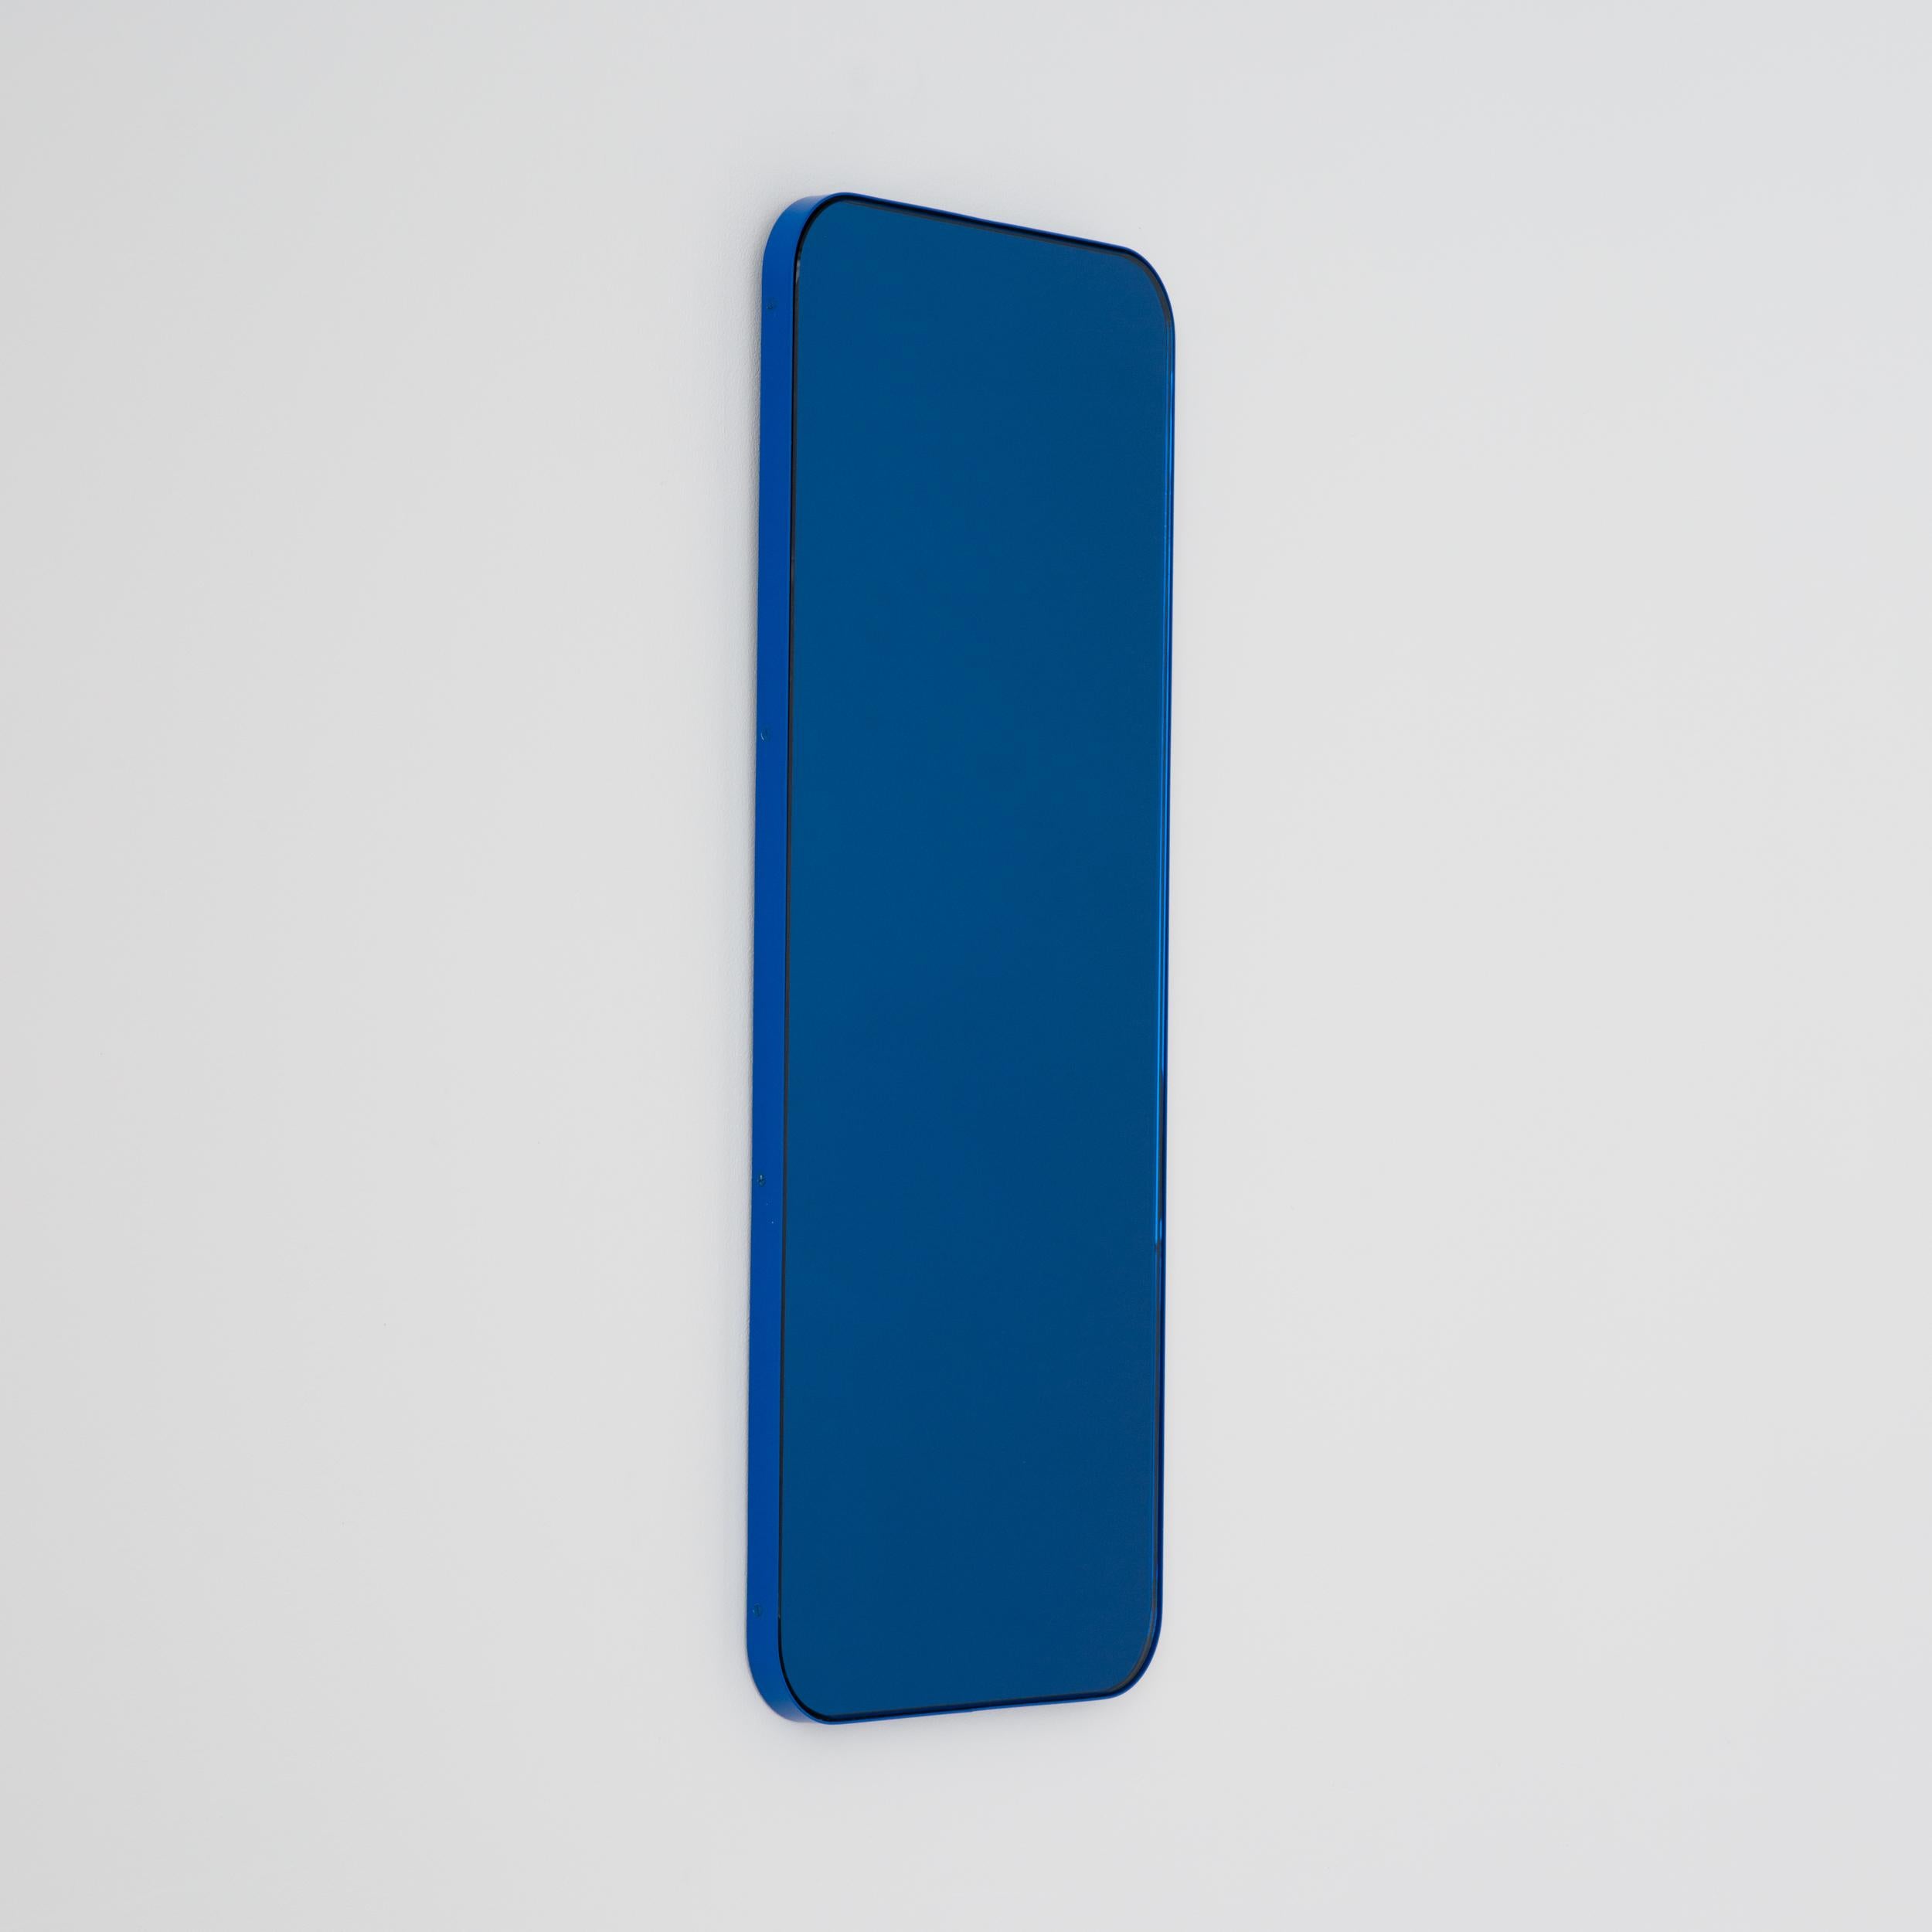 Quadris Rectangular Blue Tinted Mirror with Blue Frame, XL For Sale 1